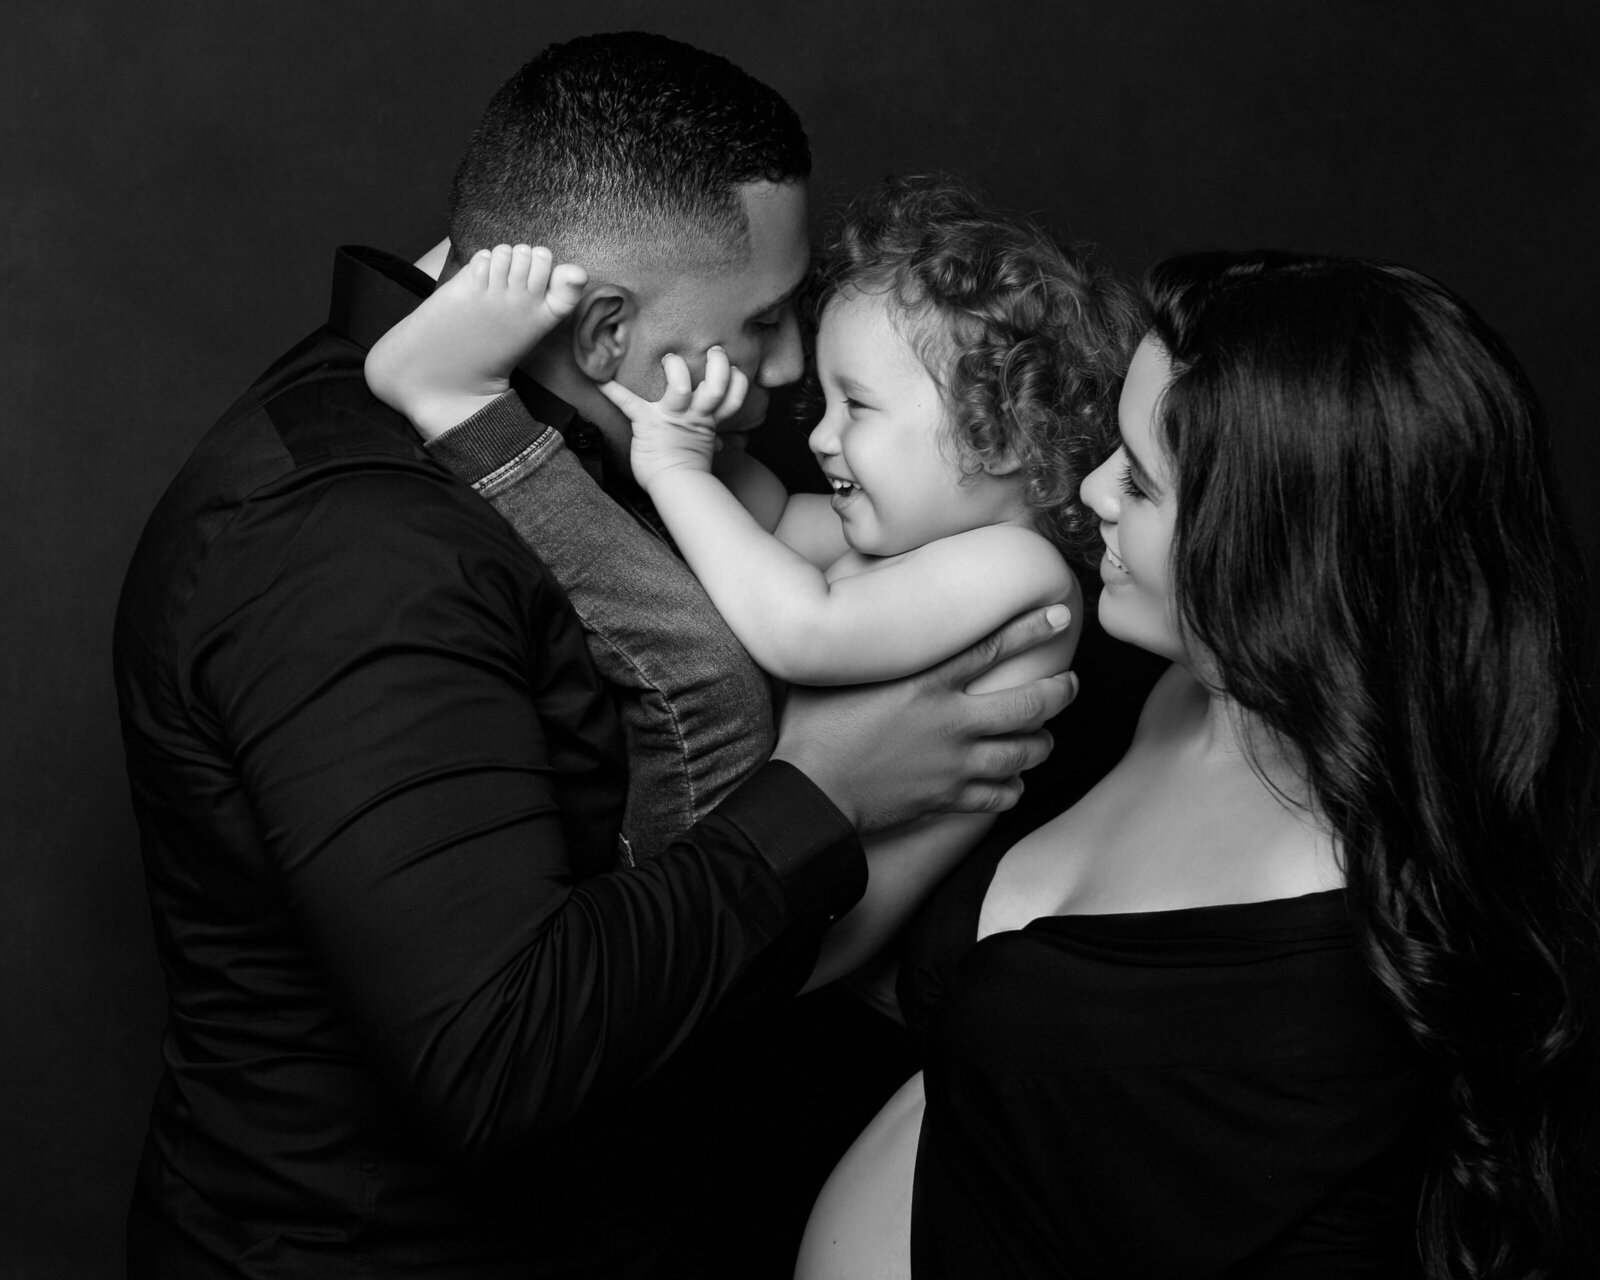 Artistic family portrait by photographer Daisy Rey in NJ